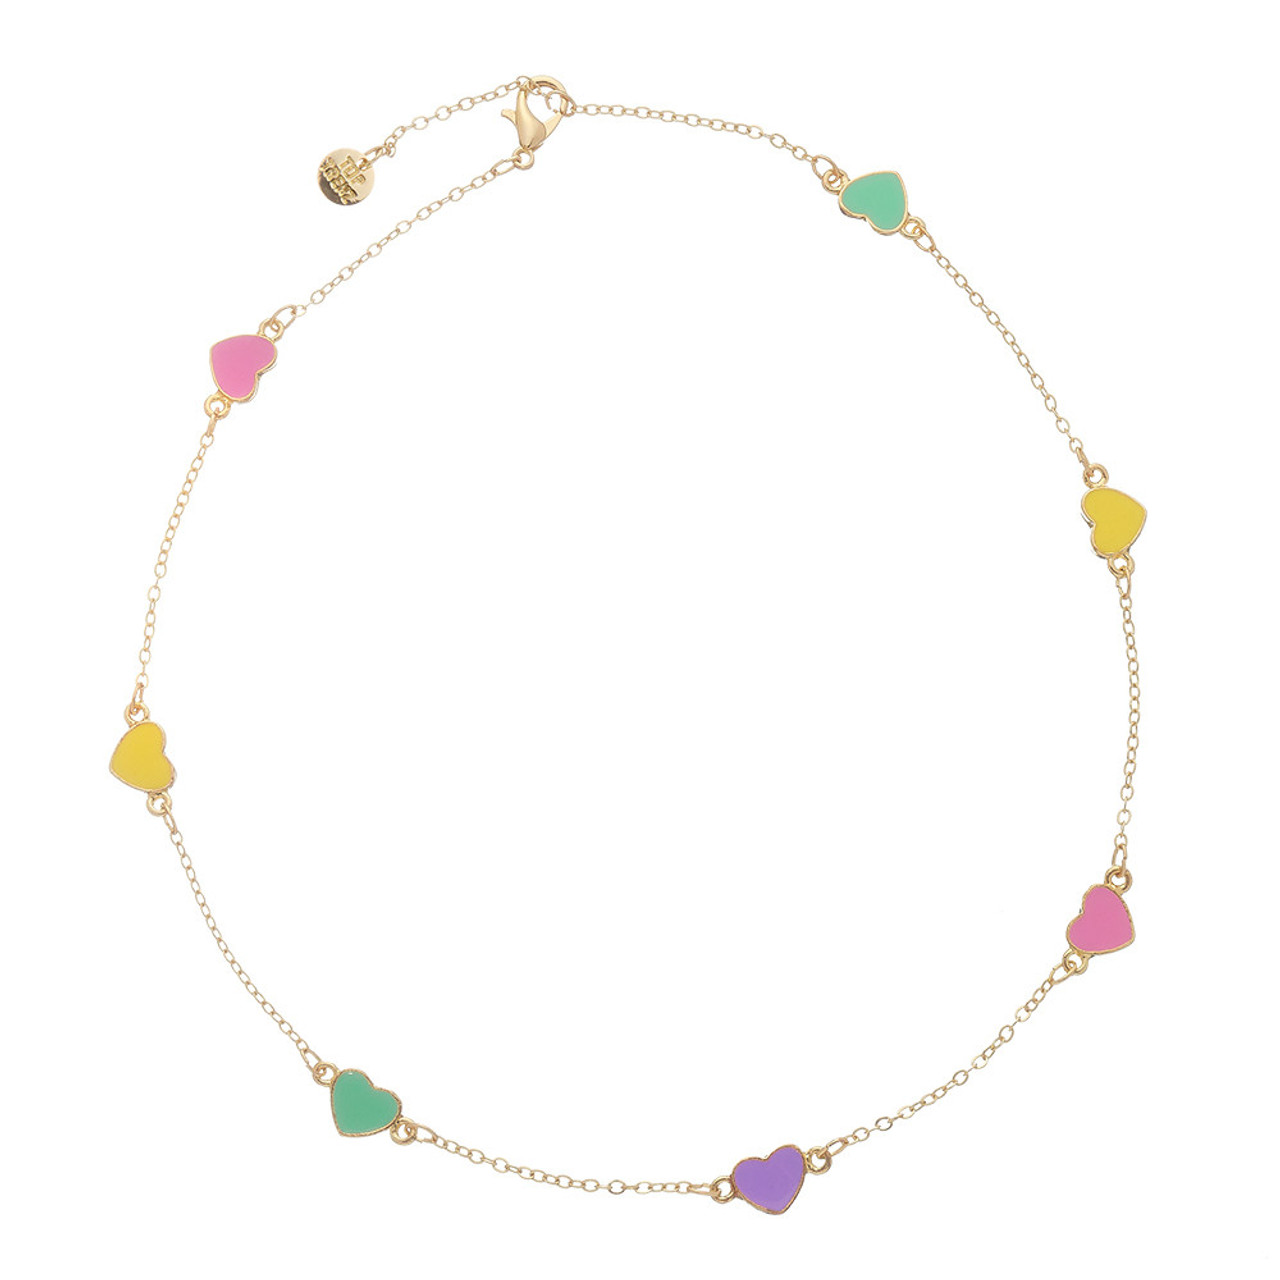 Top Trenz Charm After Charm Choker Necklaces Collection